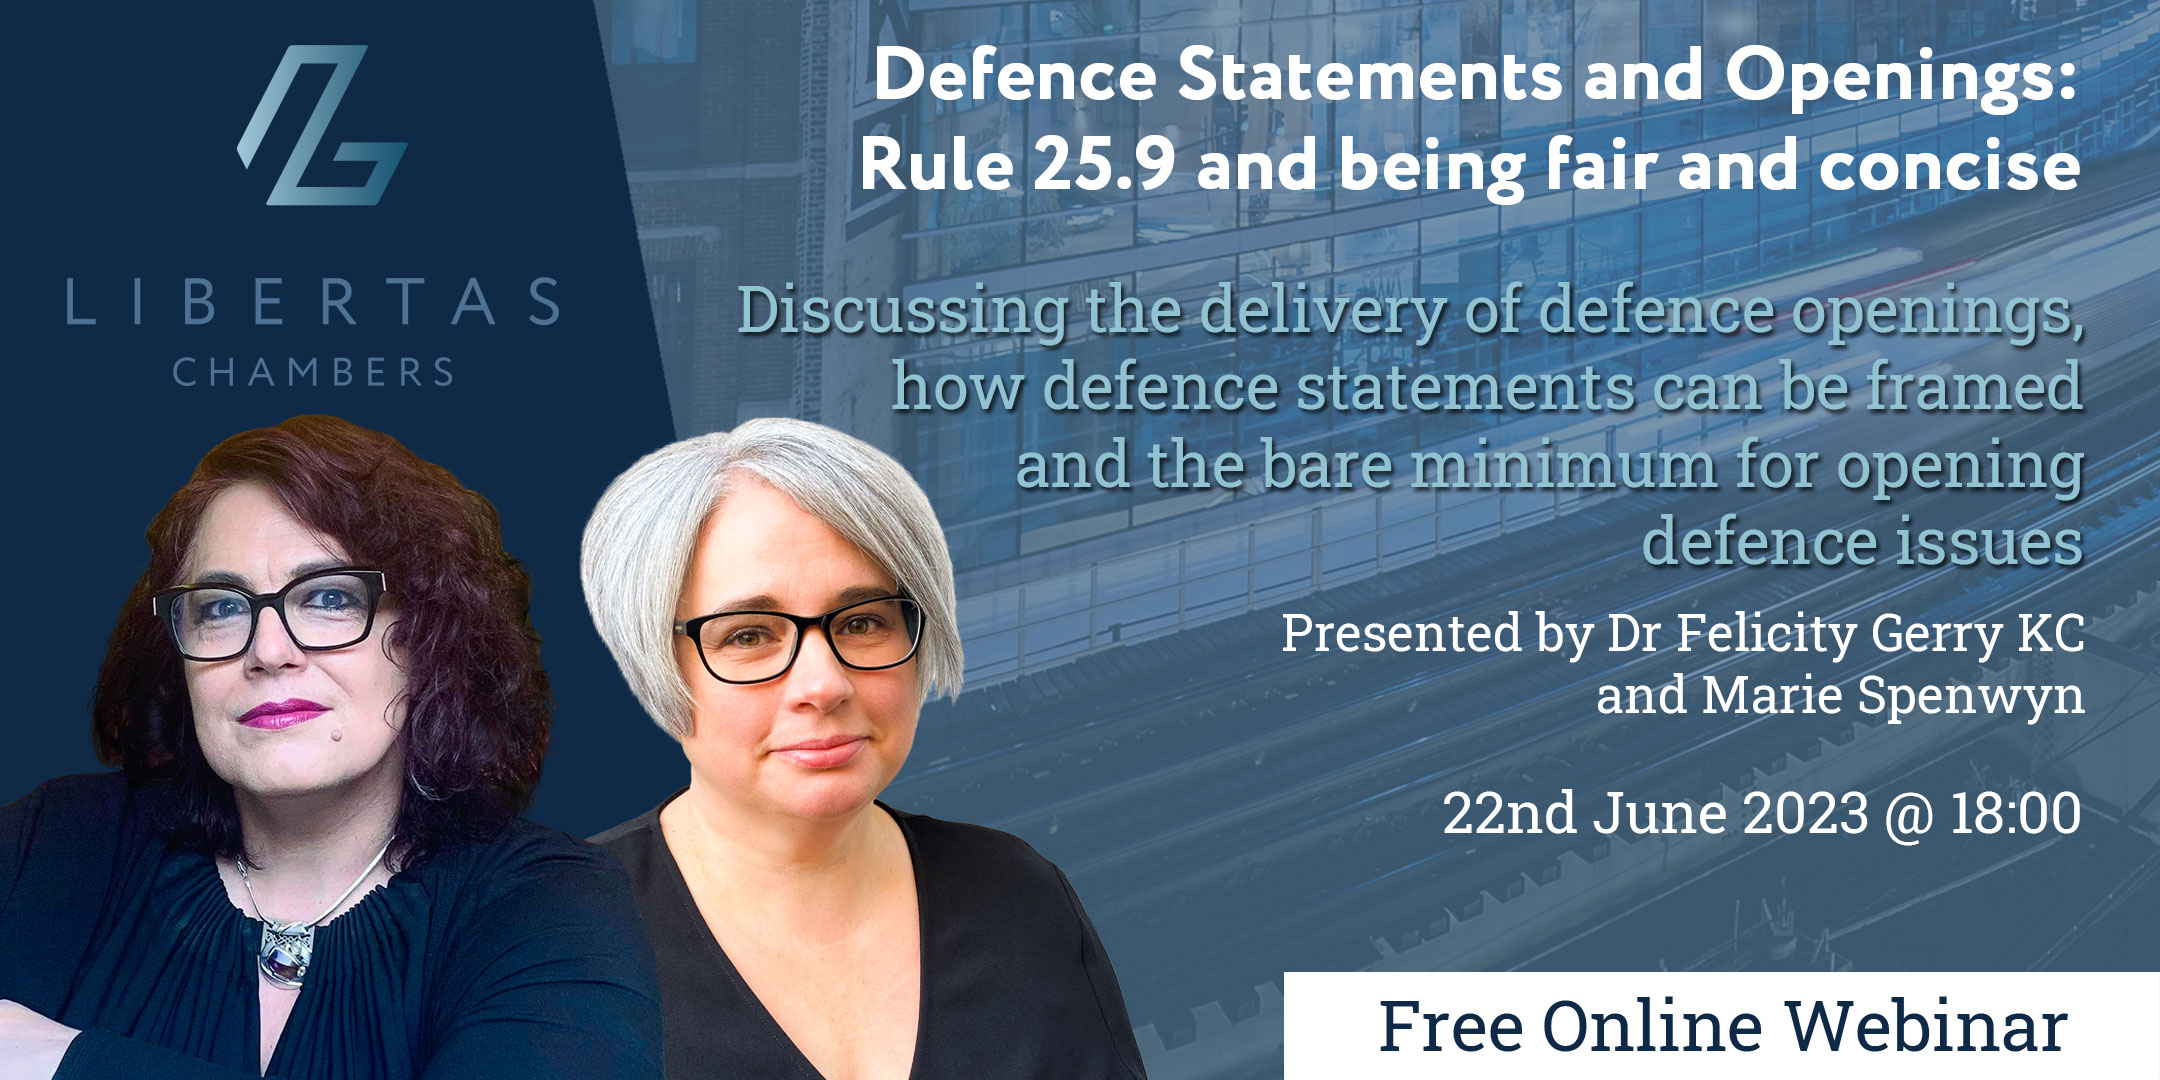 Defence Statements and Openings: Rule 25.9 and being fair and concise